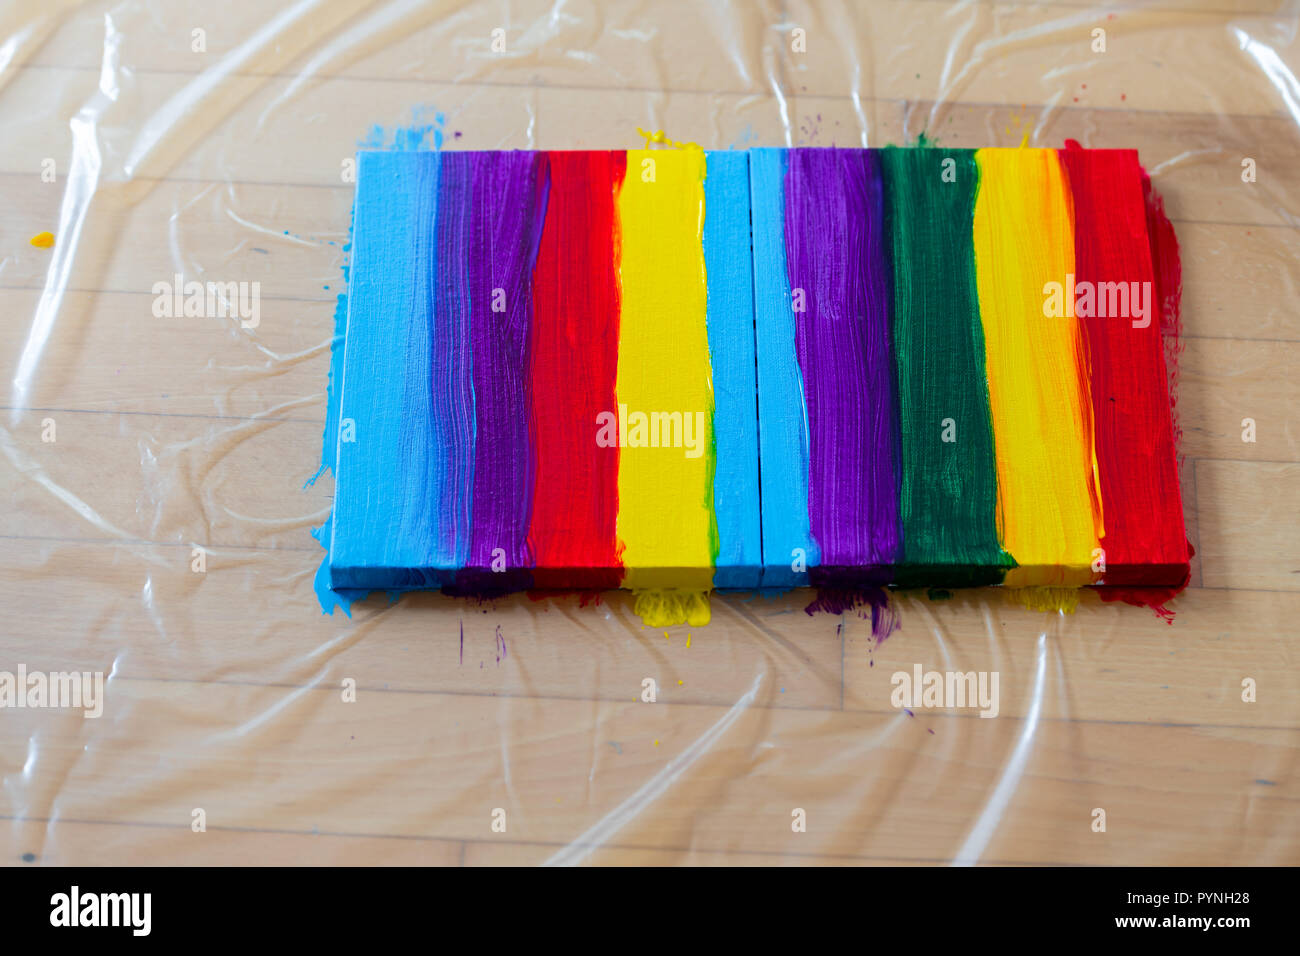 Rainbow on canvas painted with colorful pattern, nobody, close up, acrylic colors, DIY crafts Stock Photo